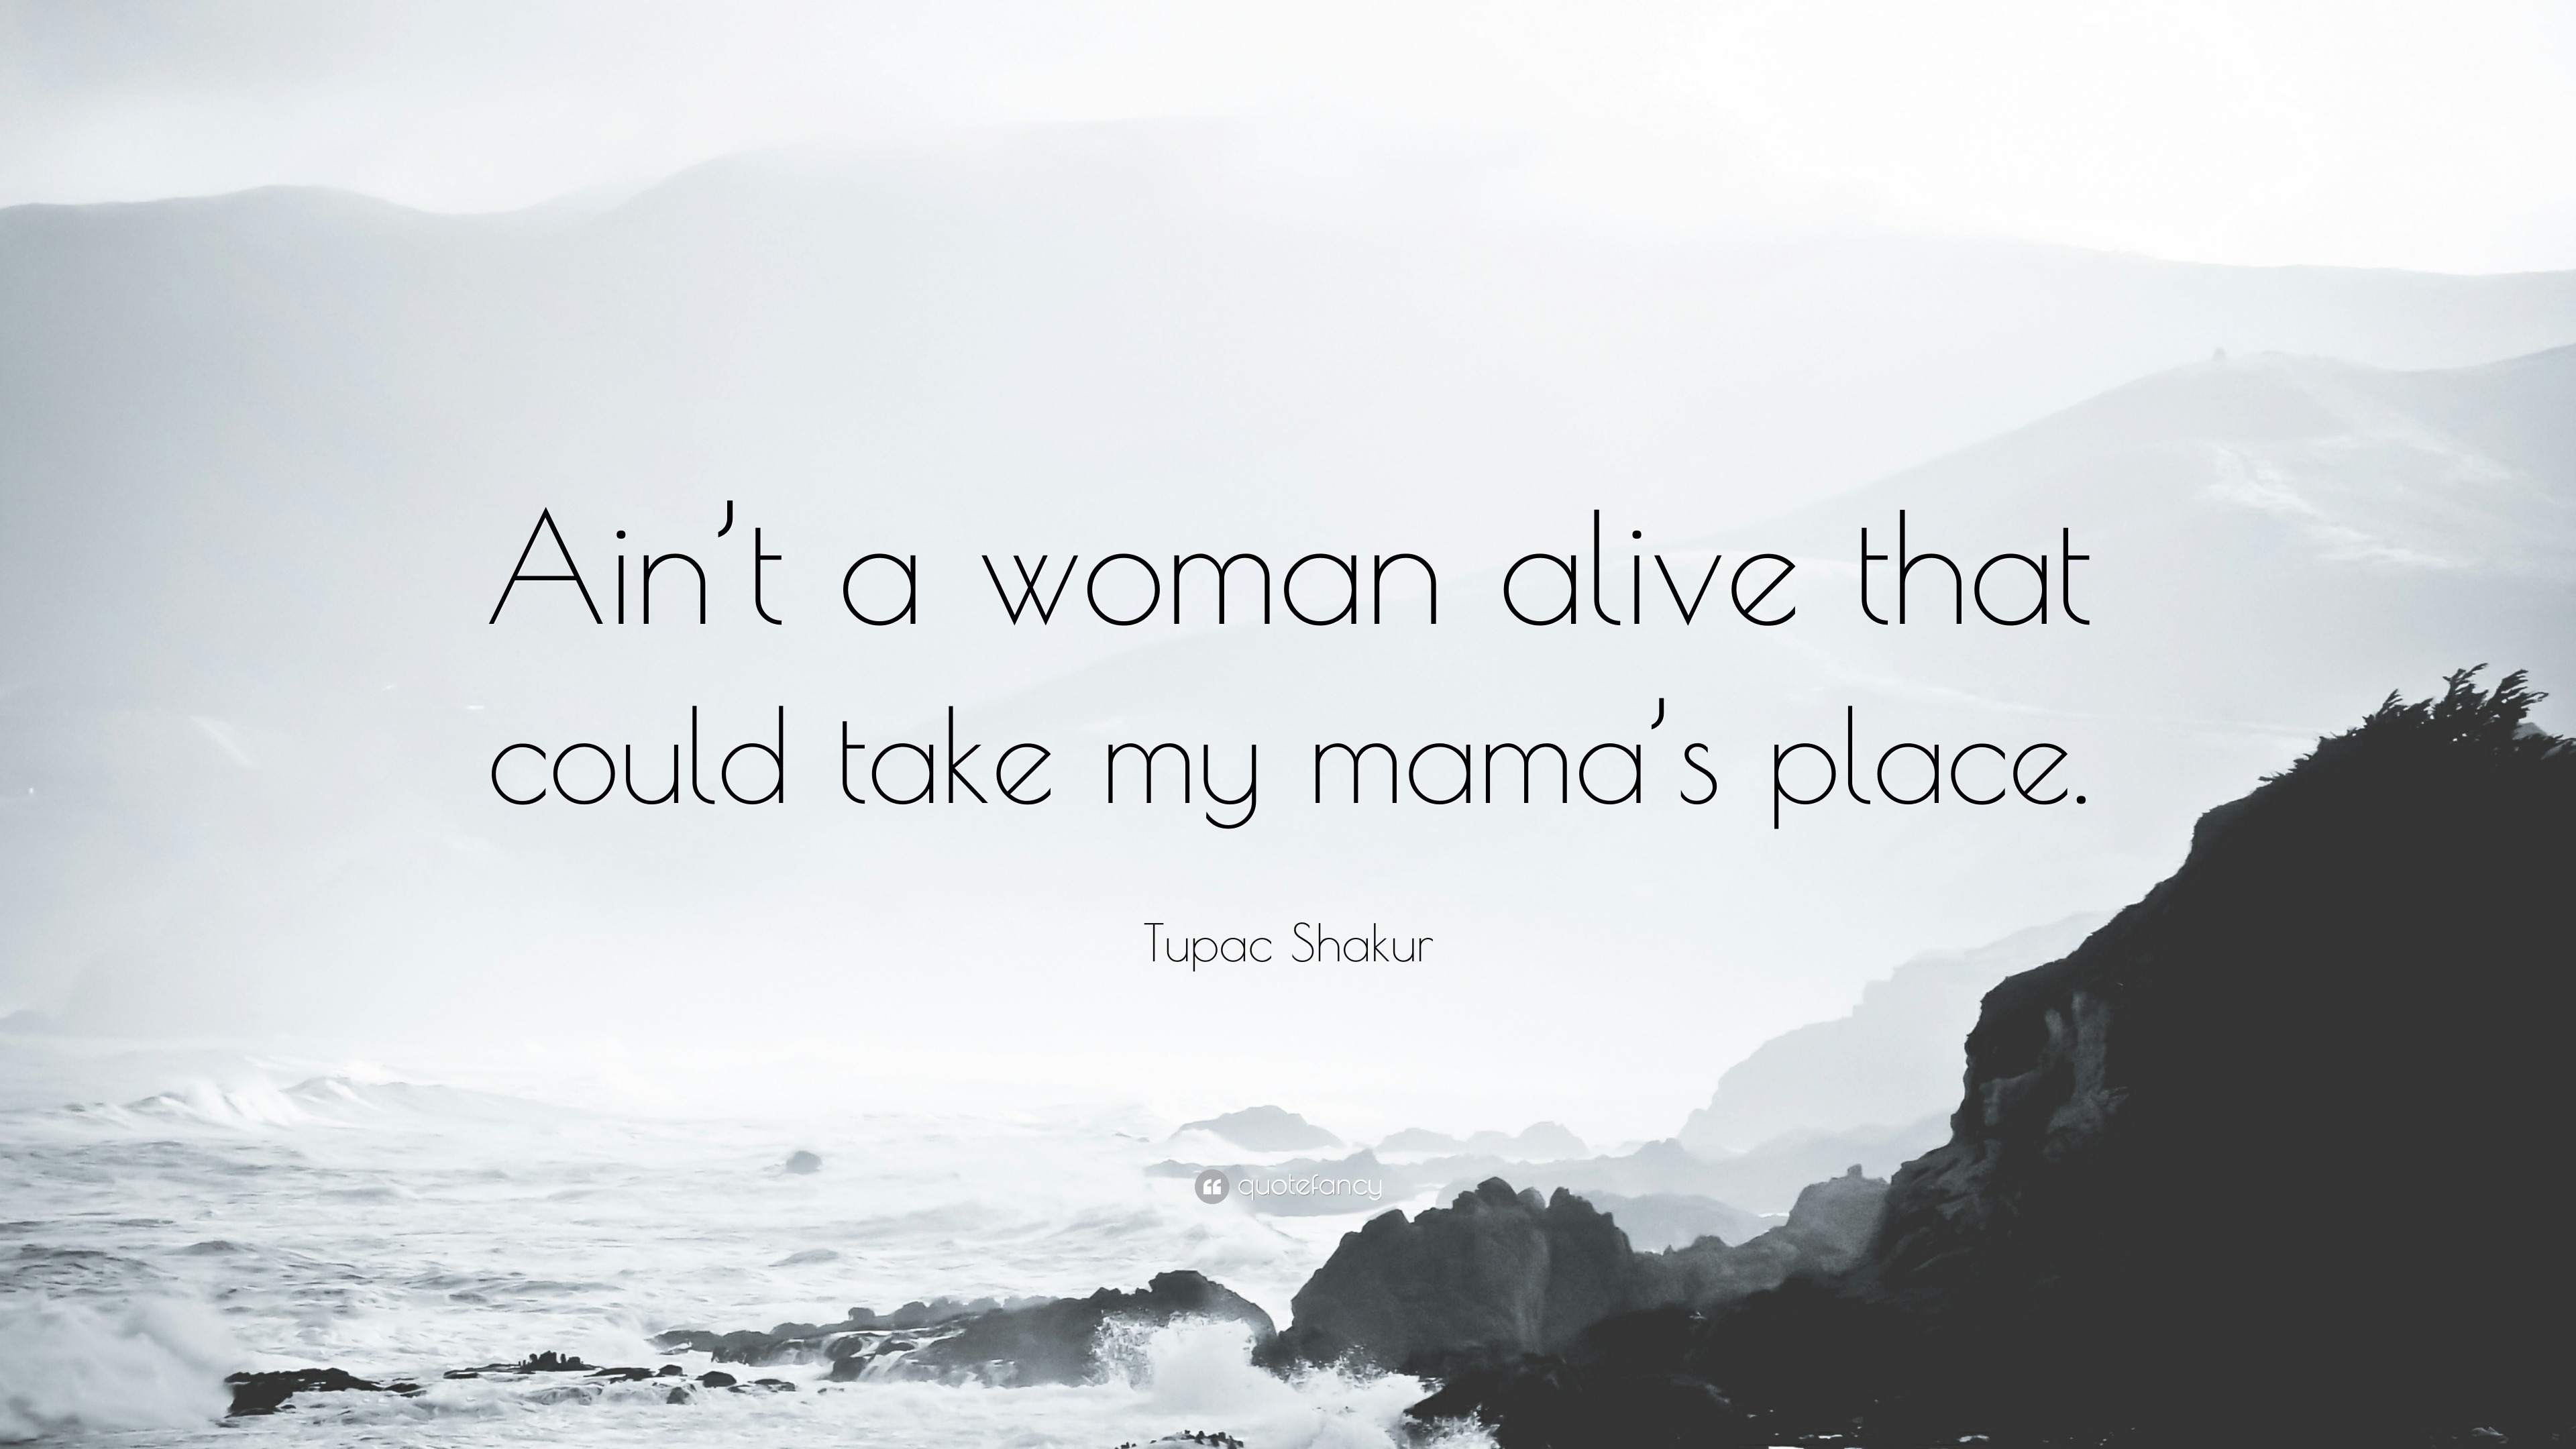 Download Tupac Shakur Quotes (100 wallpapers) - Quotefancy